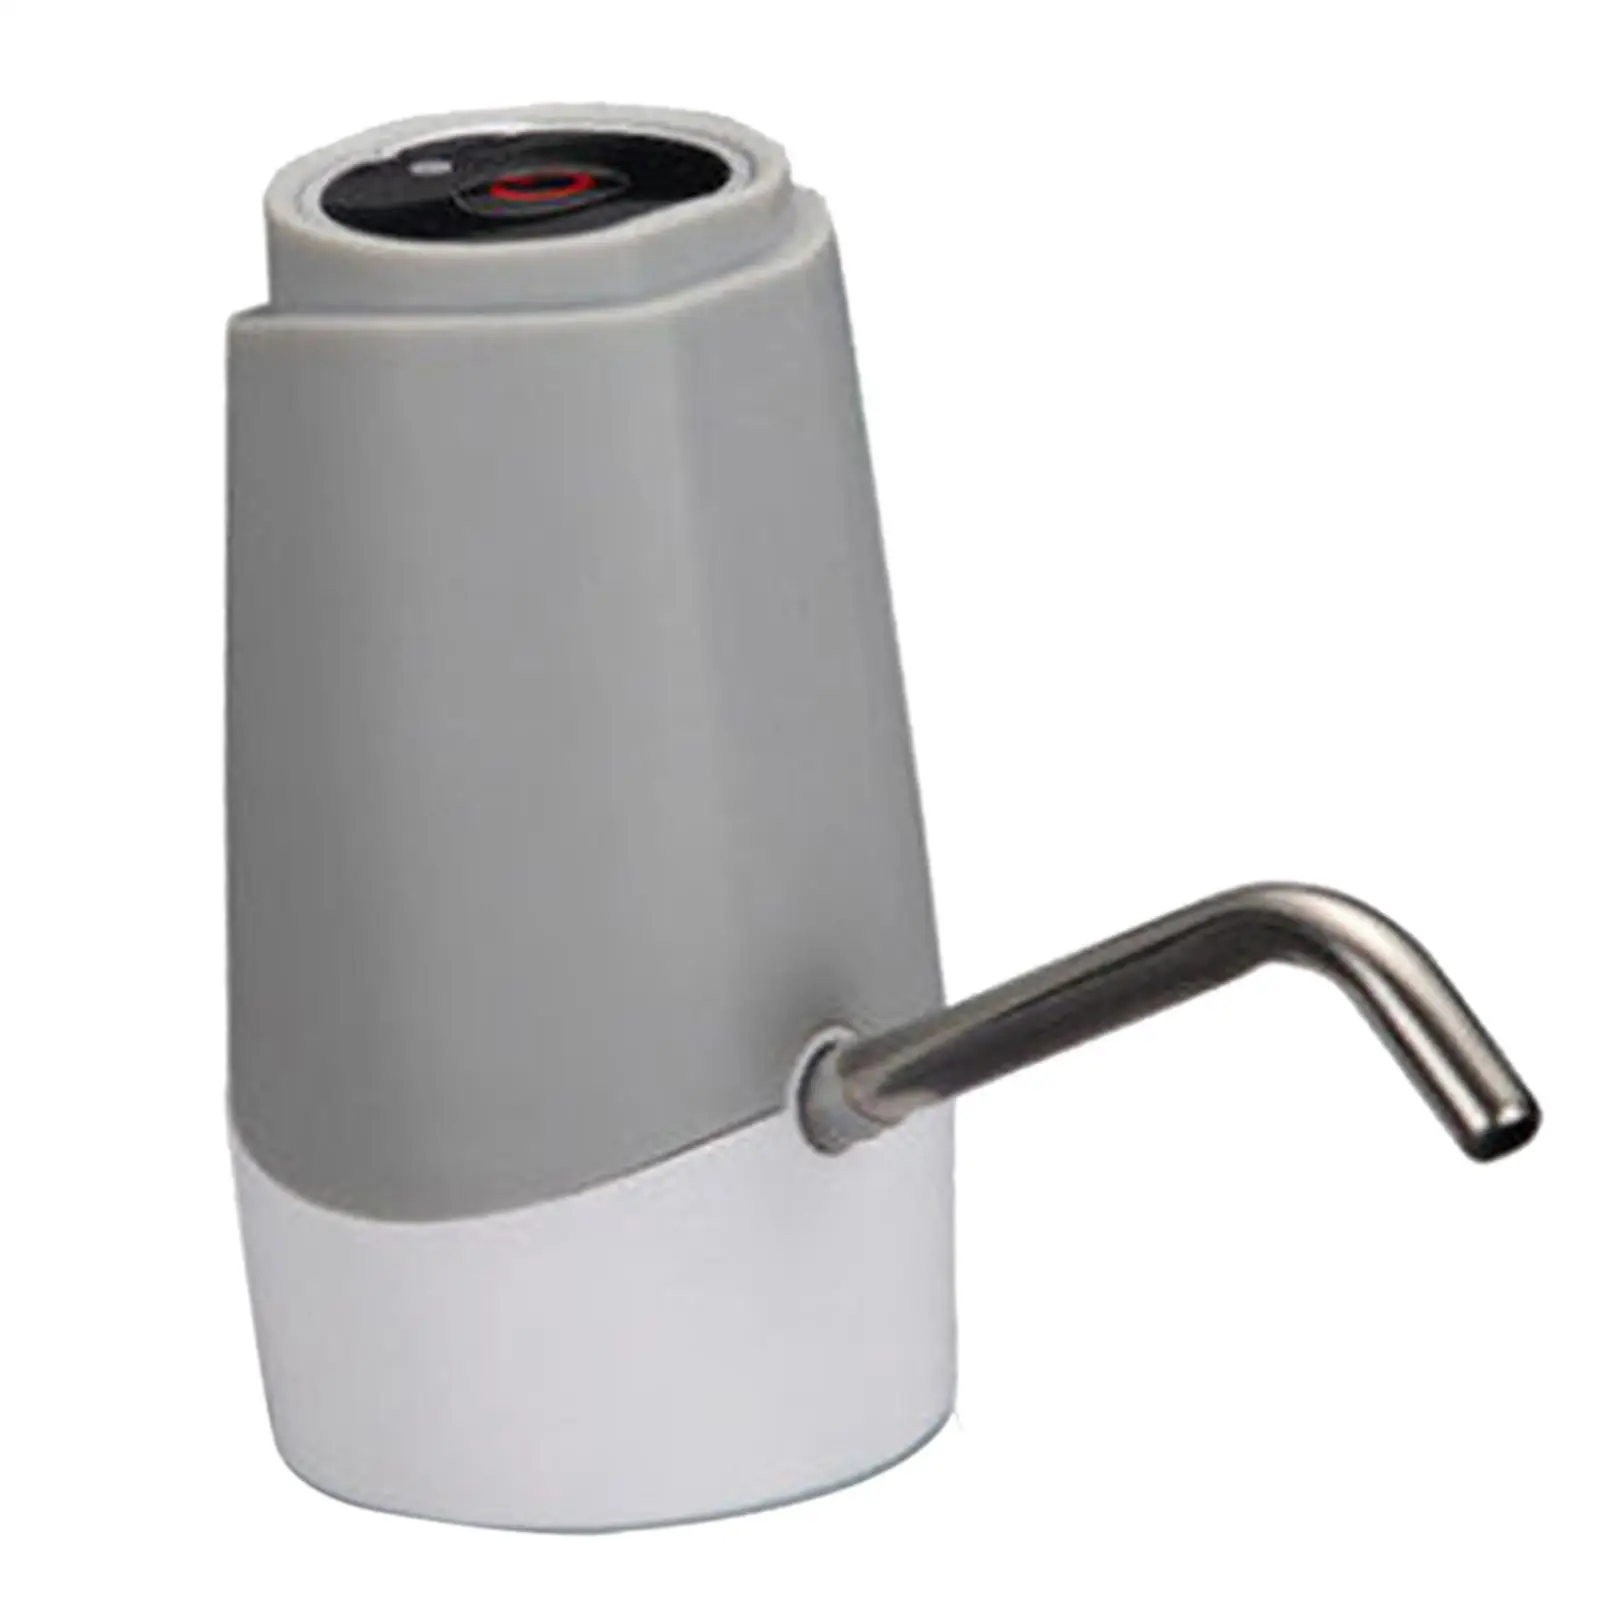 Automatic Water Dispenser, Bucket Water Dispenser Portable Water Pump Electric Pump for Hiking, Picnic, Home, Camping, Kitchen,